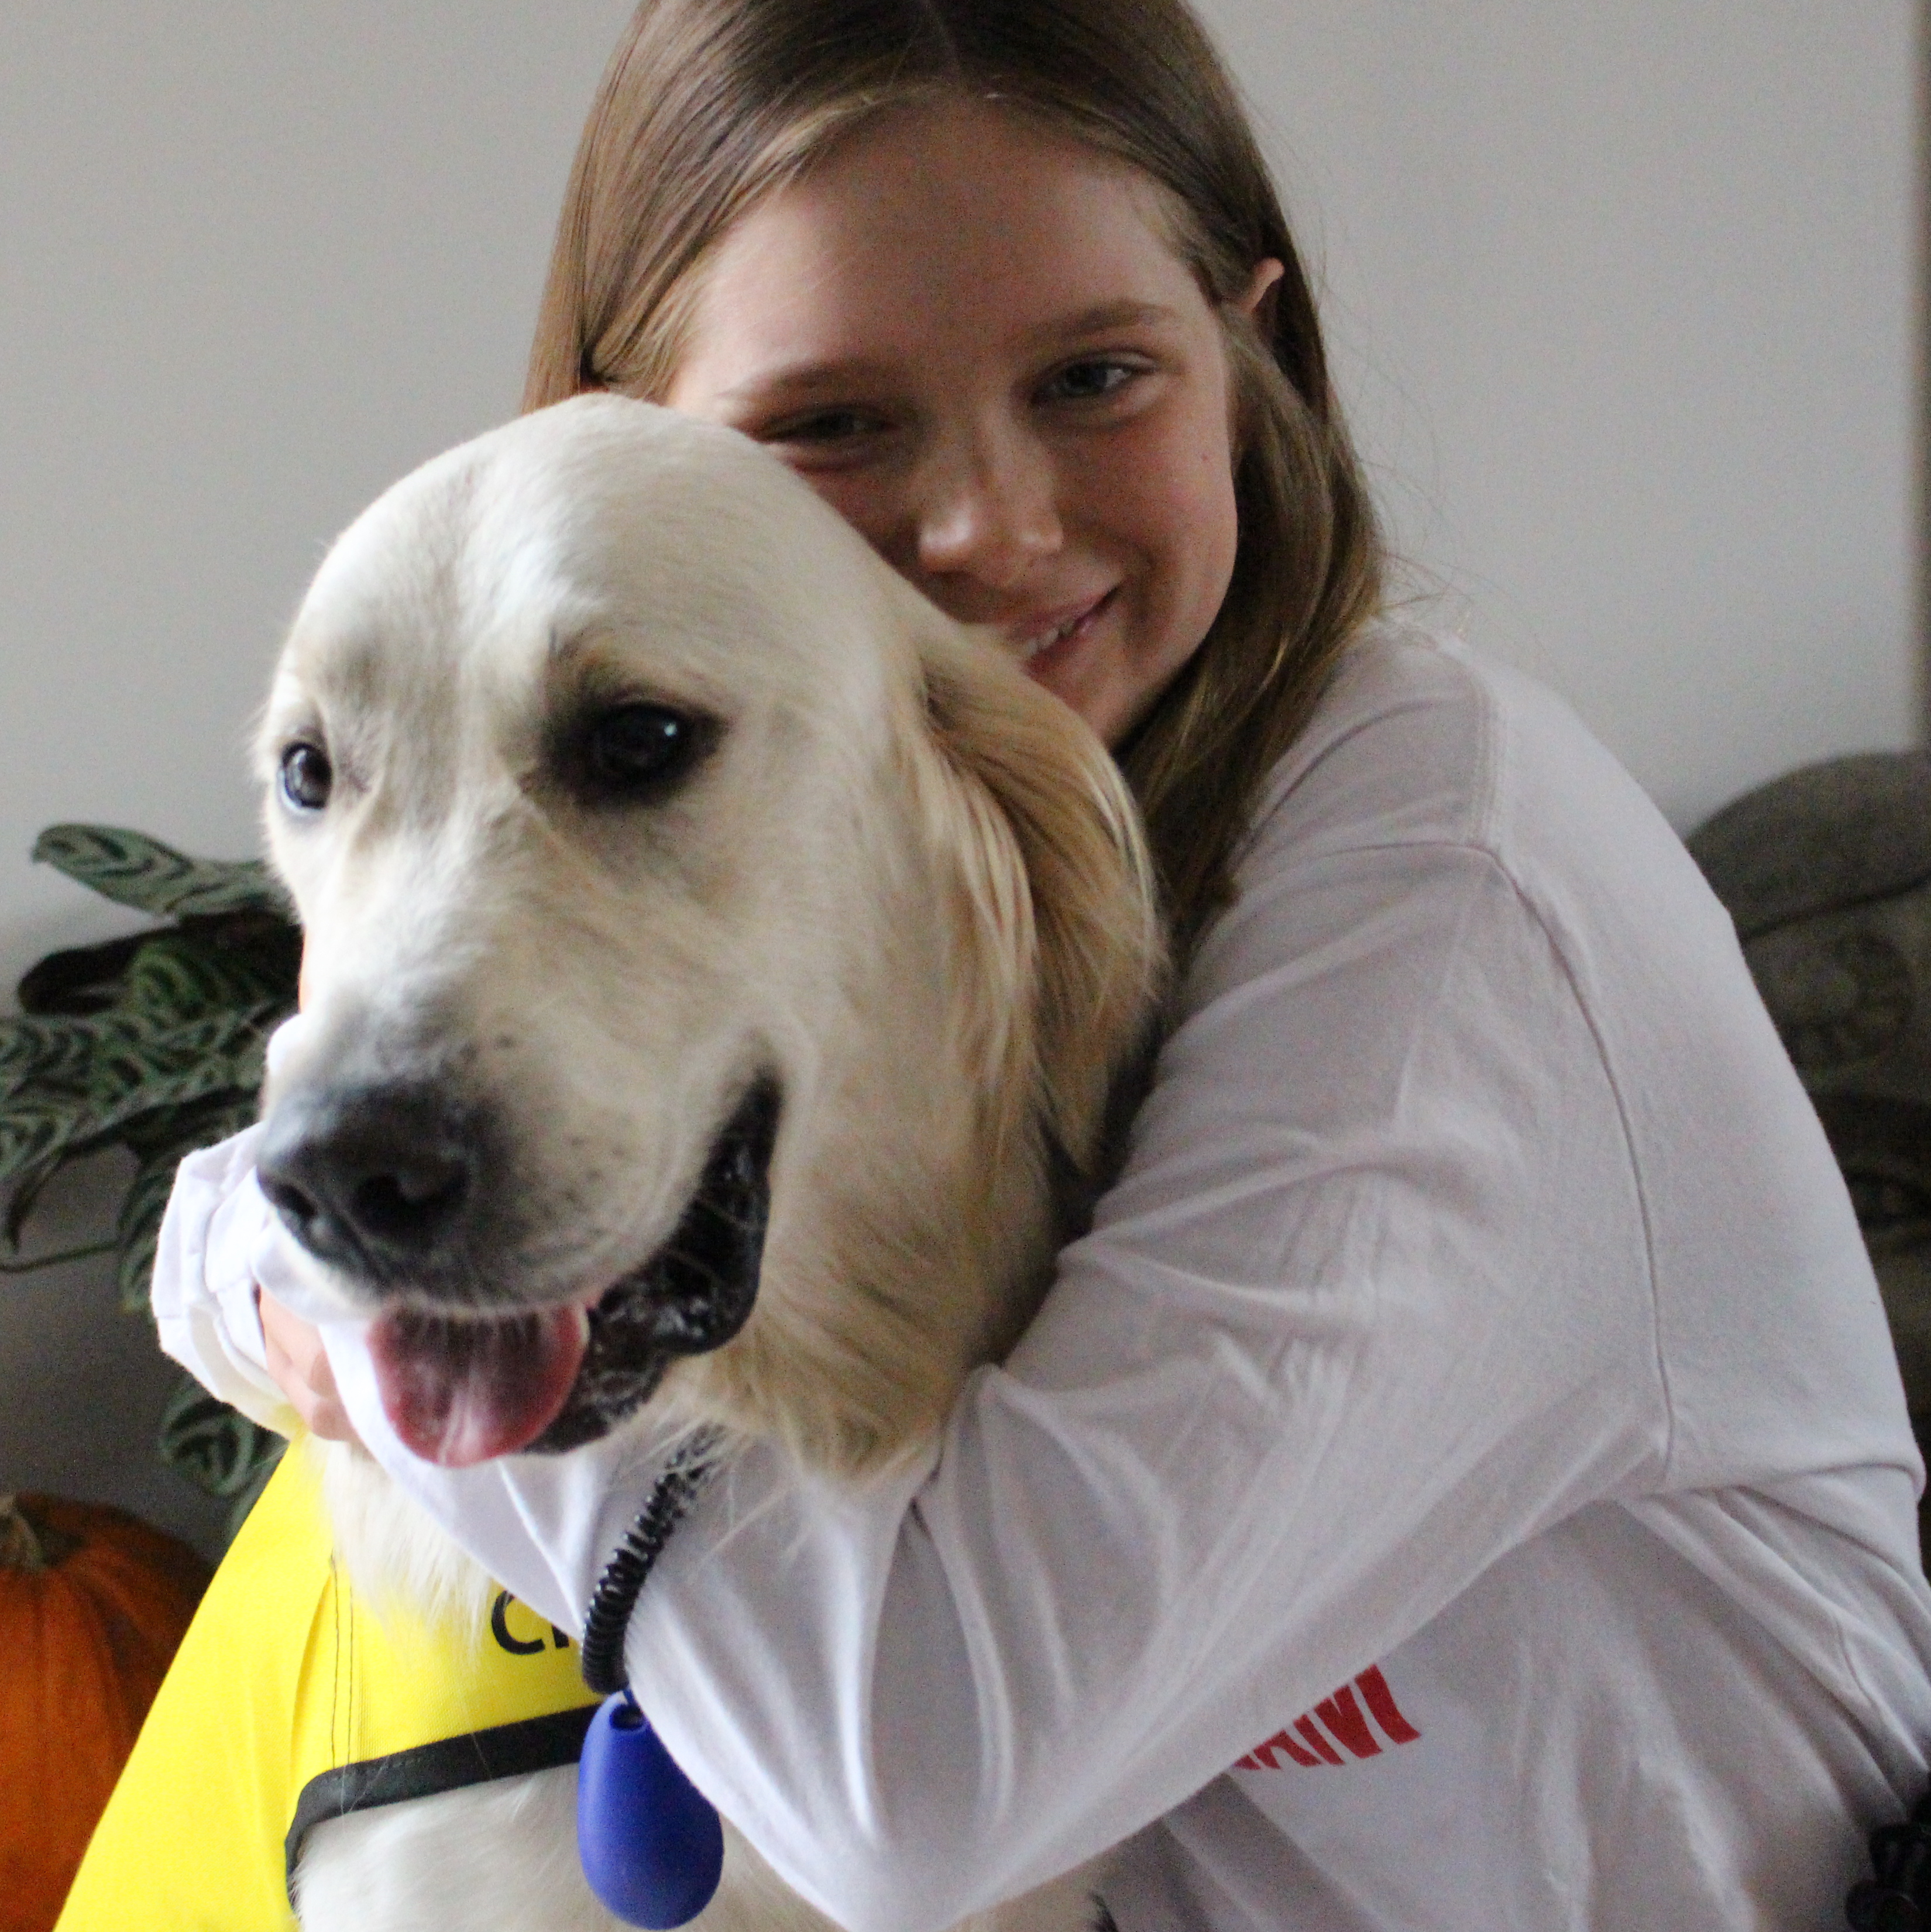 Dani sitting and hugging her buddy dog George, a golden retriever wearing a bright yellow CNIB Buddy Dog vest, both smiling for the camera